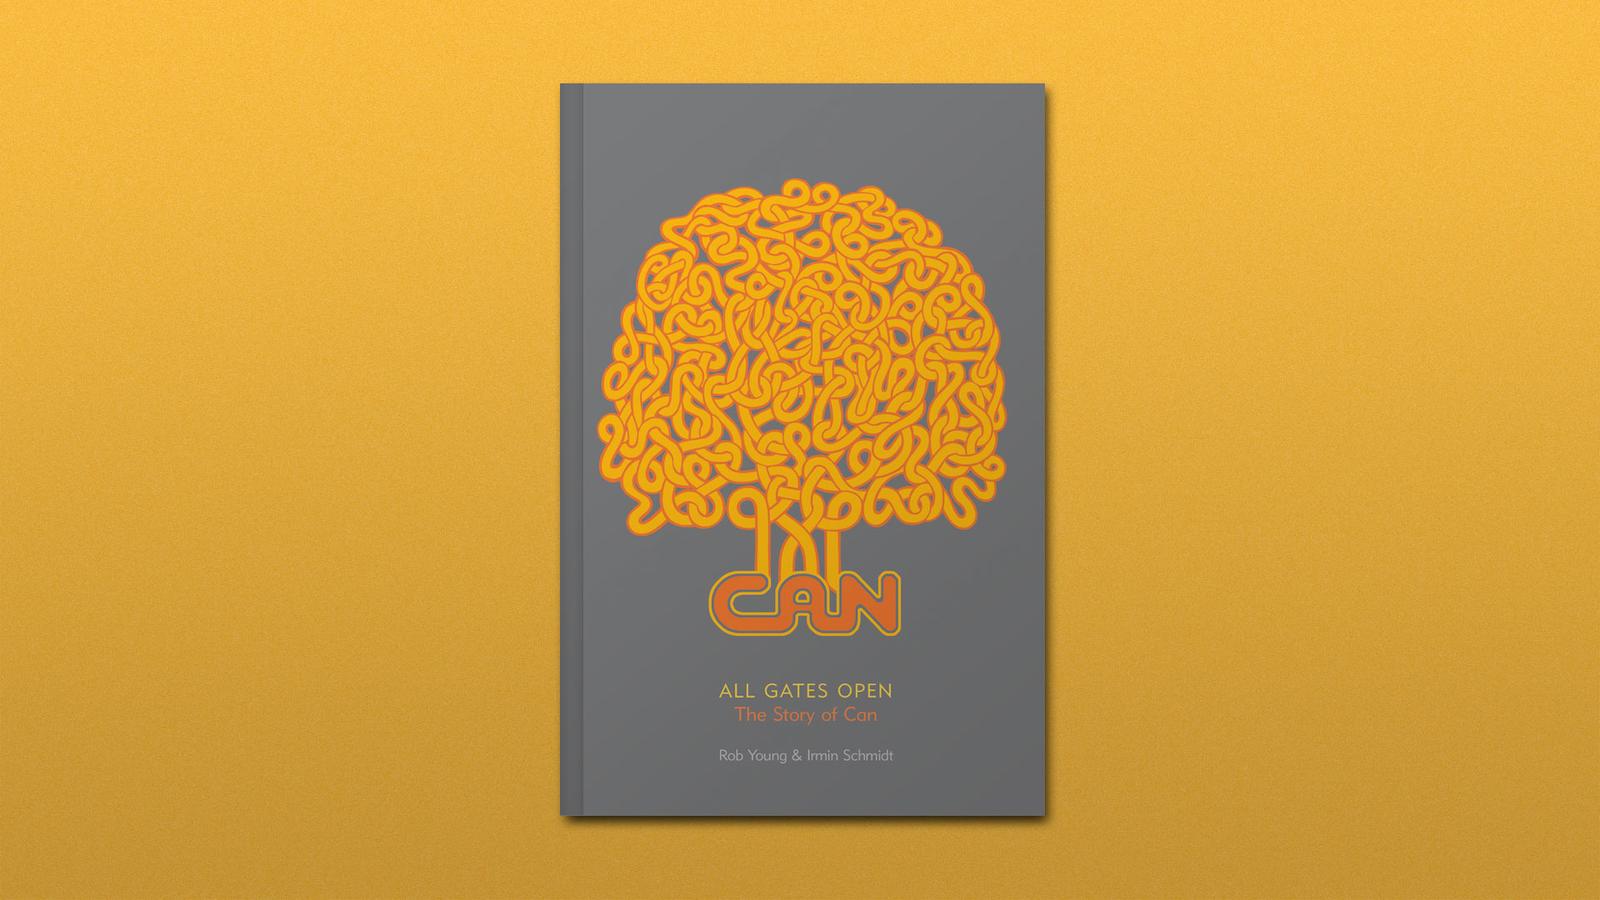 Buchrezension - All Gates Open Story Of Can